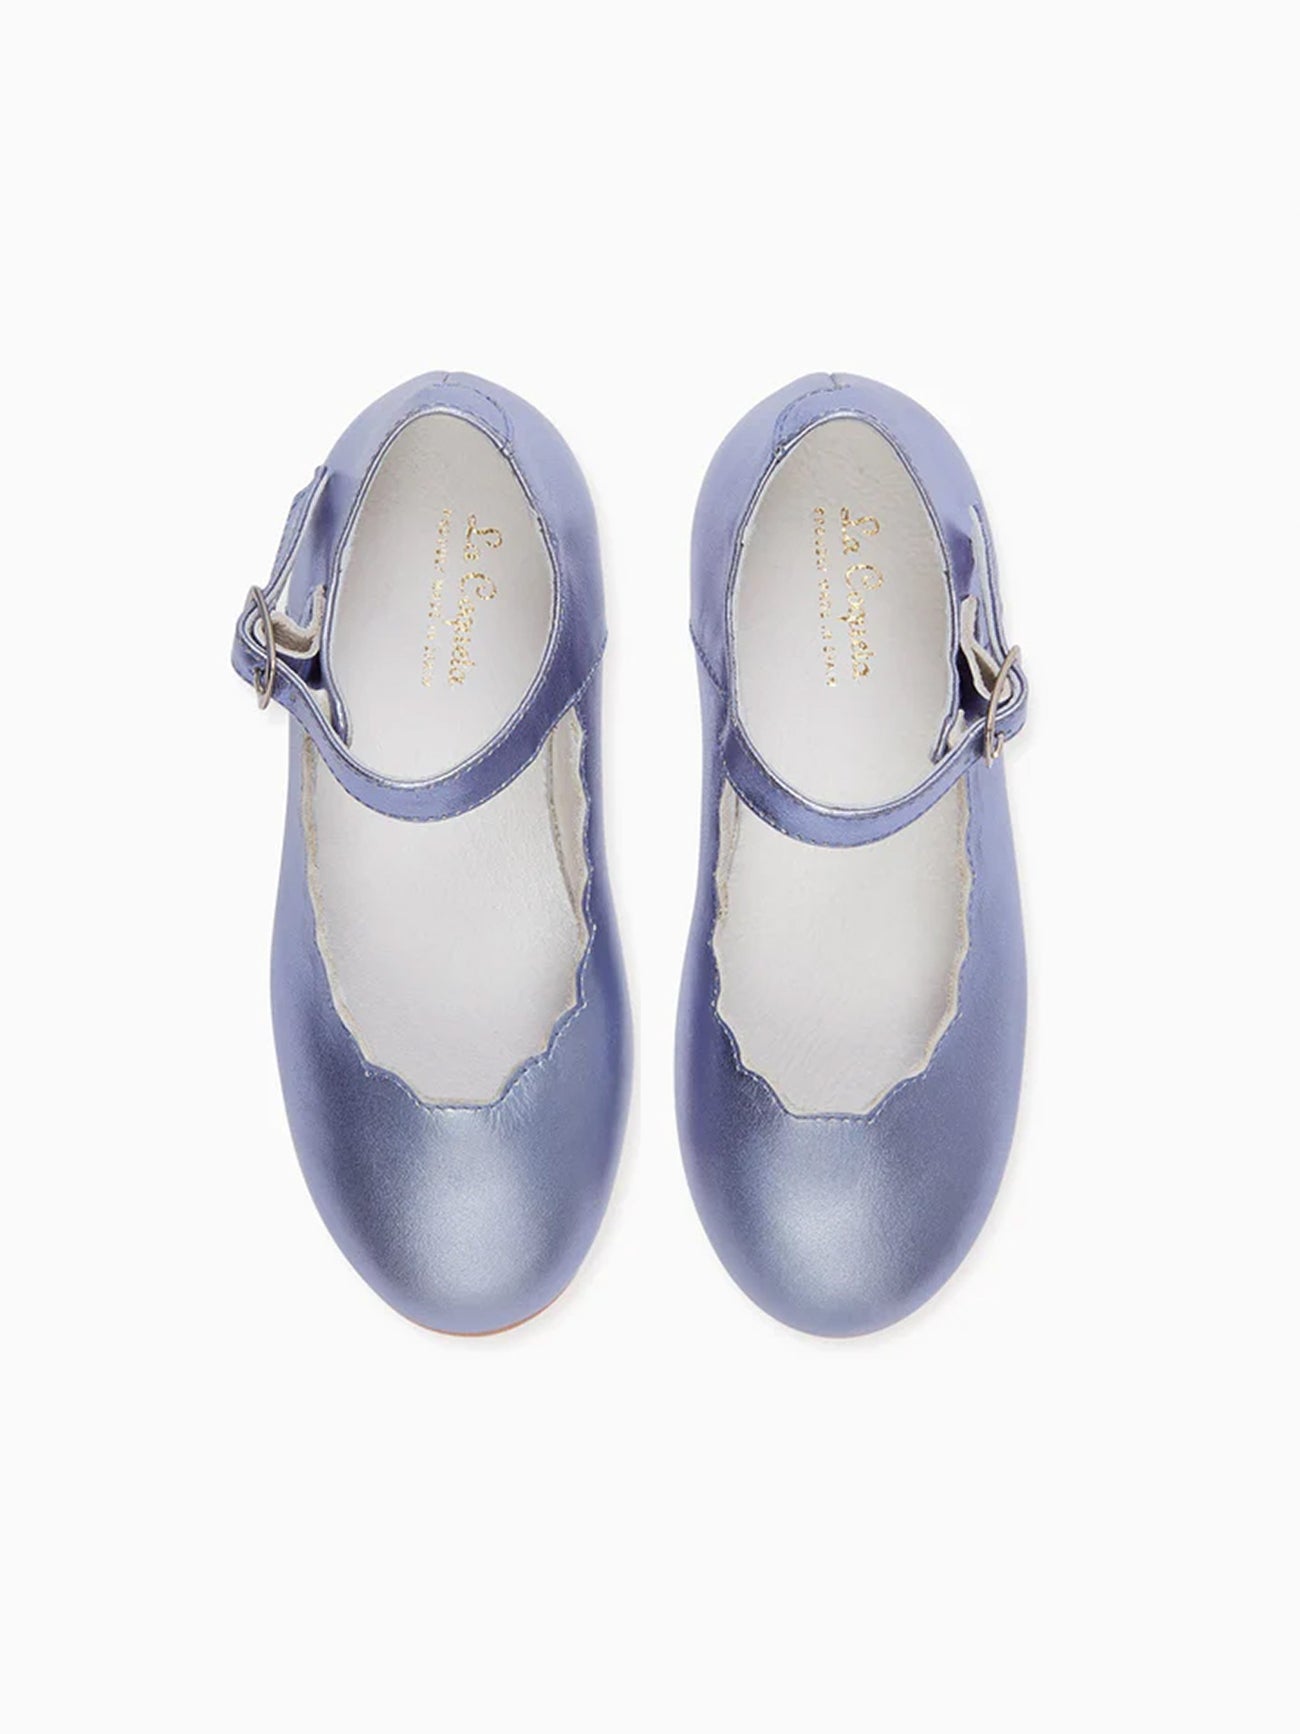 Metallic Lilac Leather Girl Scallop Mary Jane Shoes